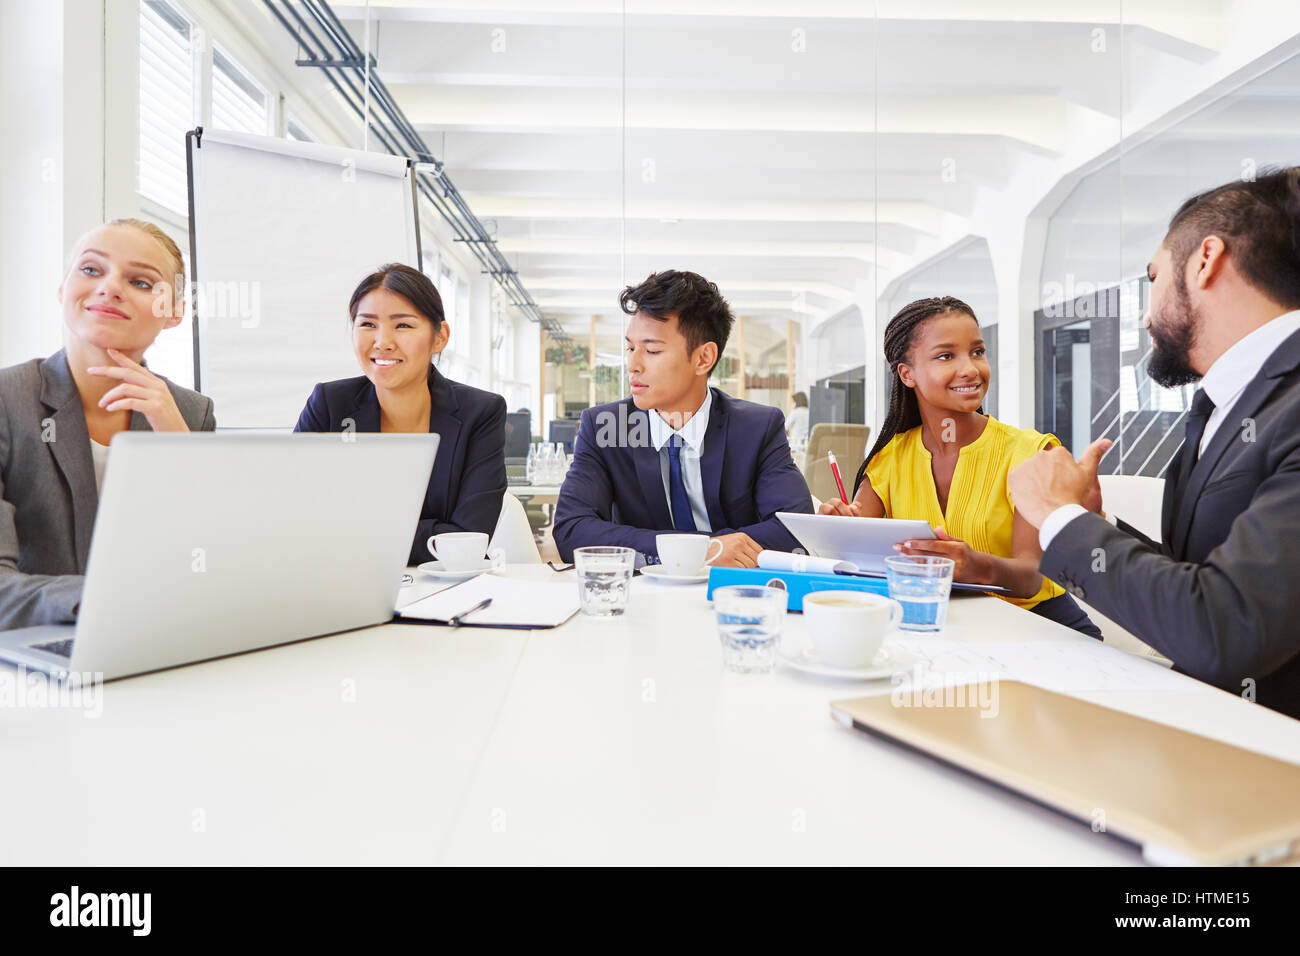 Interracial team working together in business meeting Stock Photo